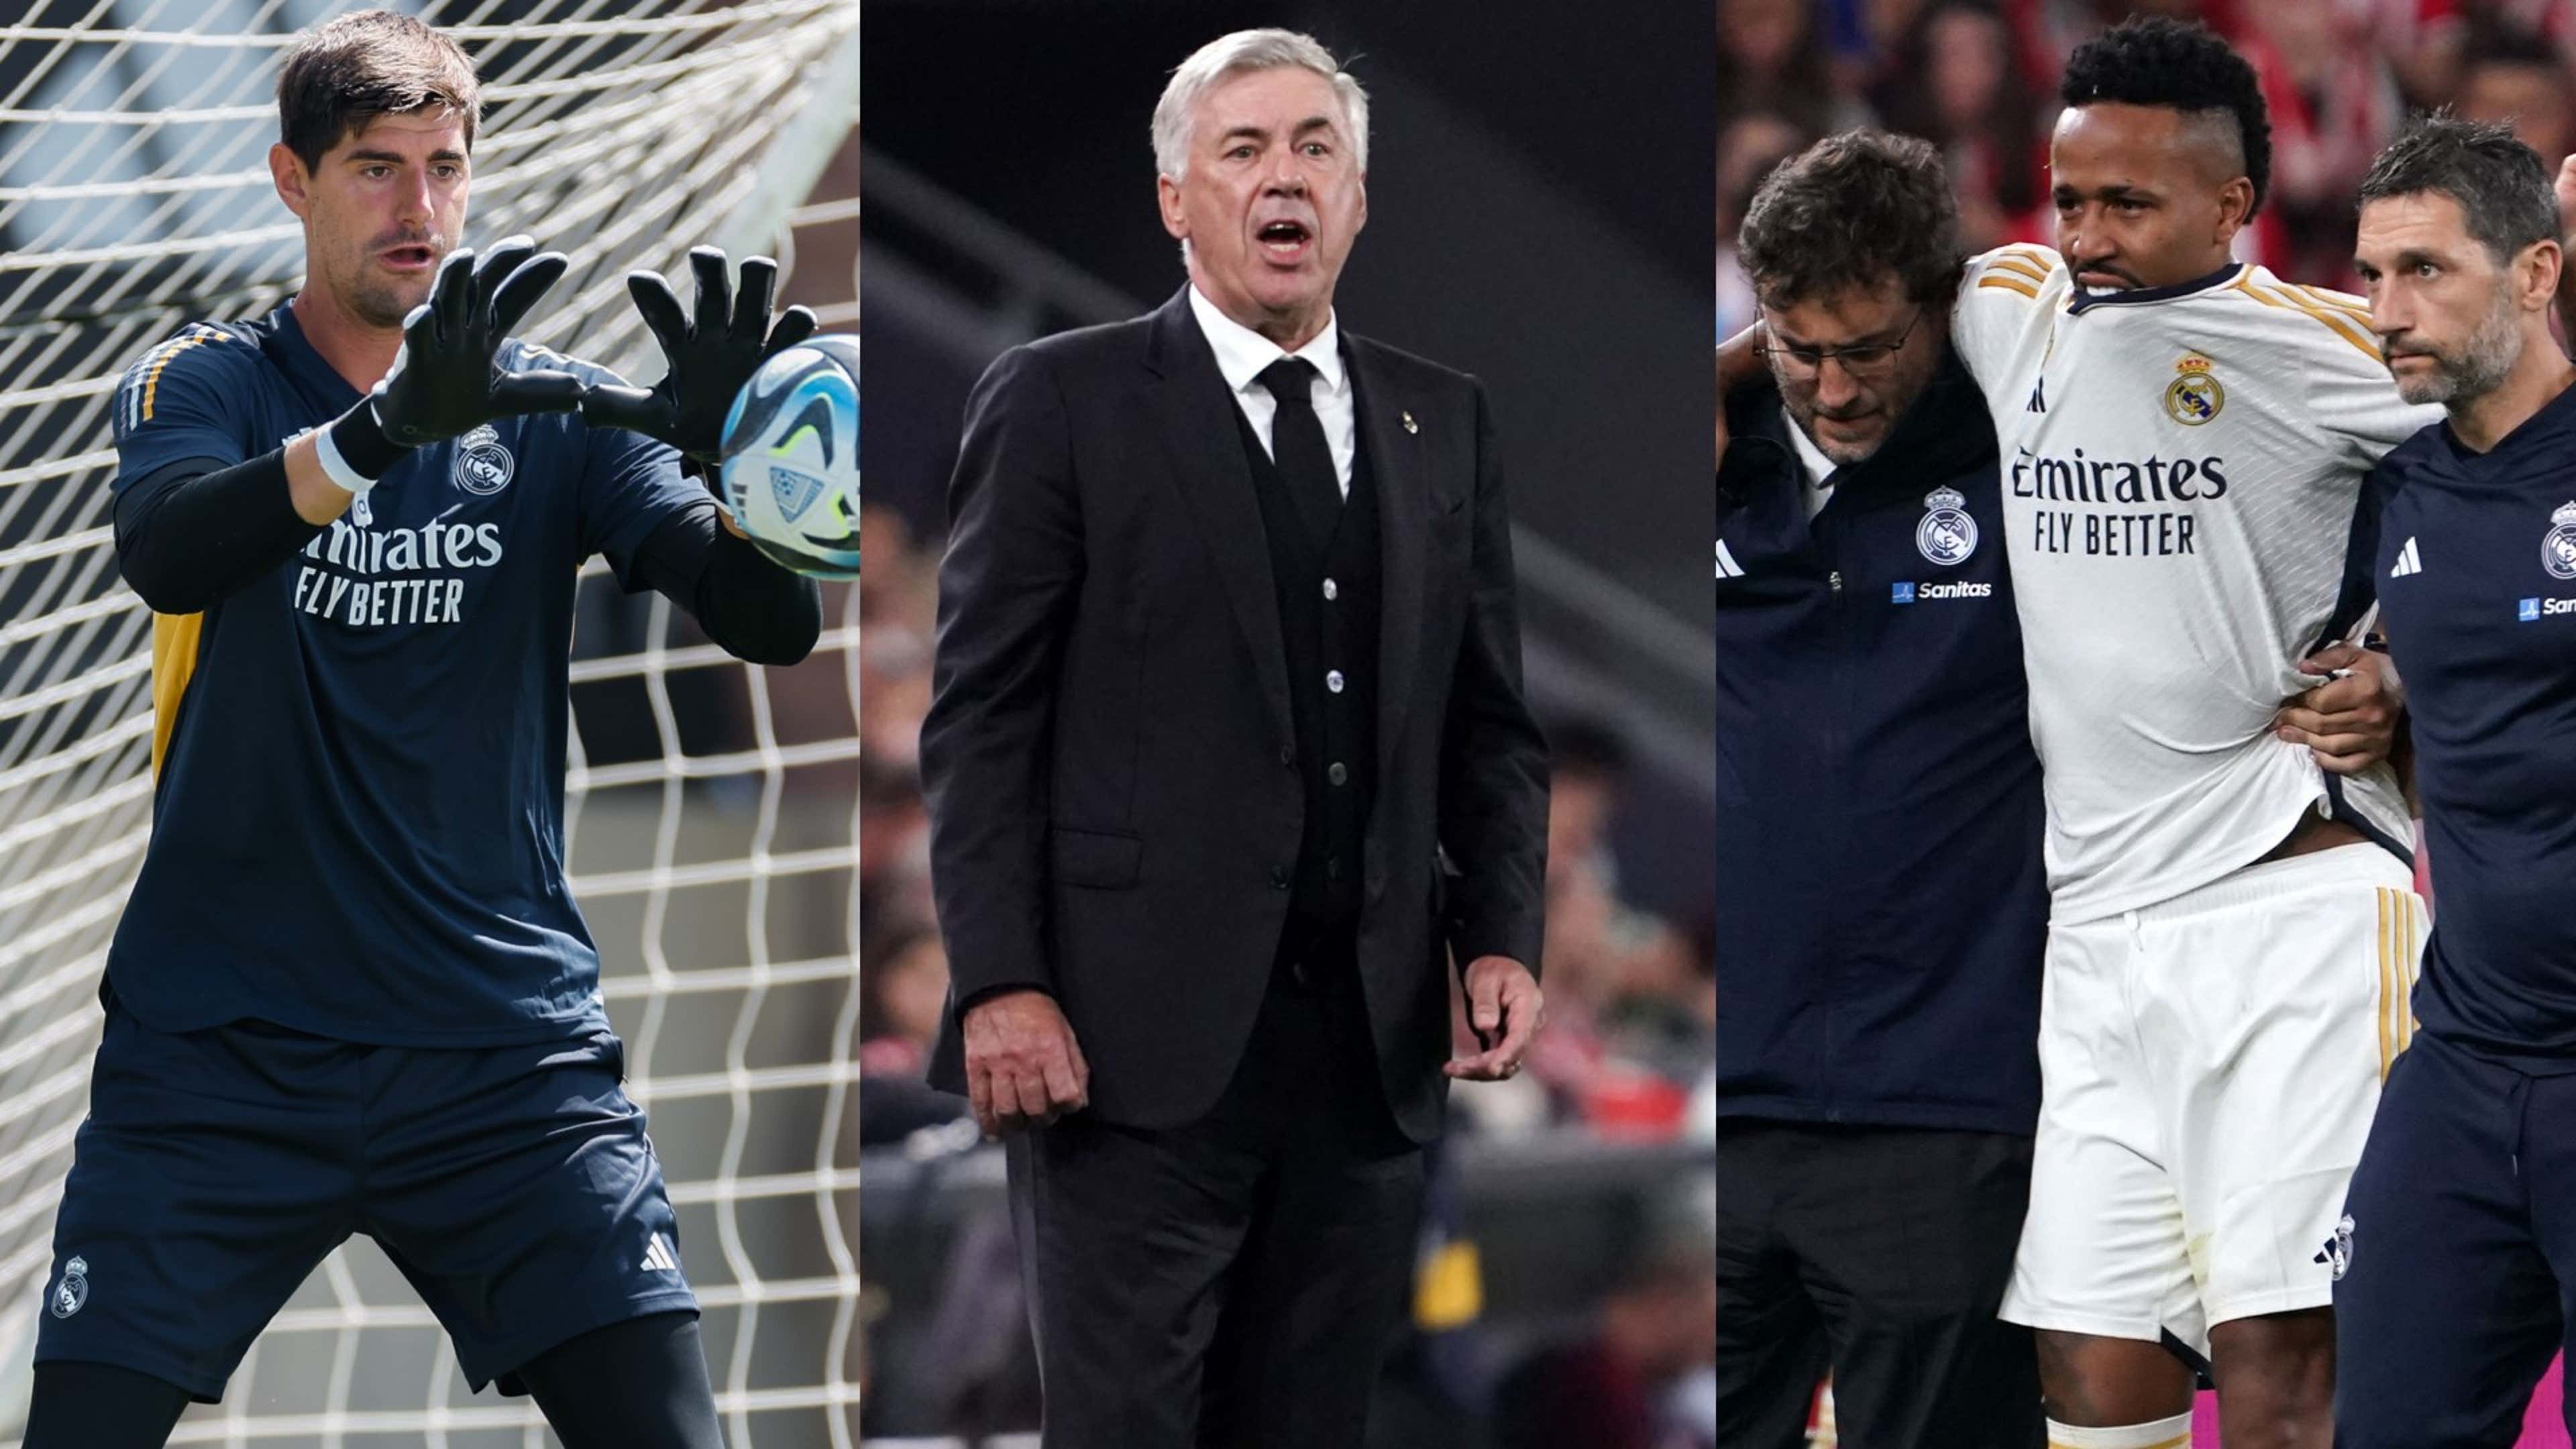 Injuries have robbed Real Madrid of defensive stability - now they need a  striker more than ever if they are to outscore Europe's elite | Goal.com US